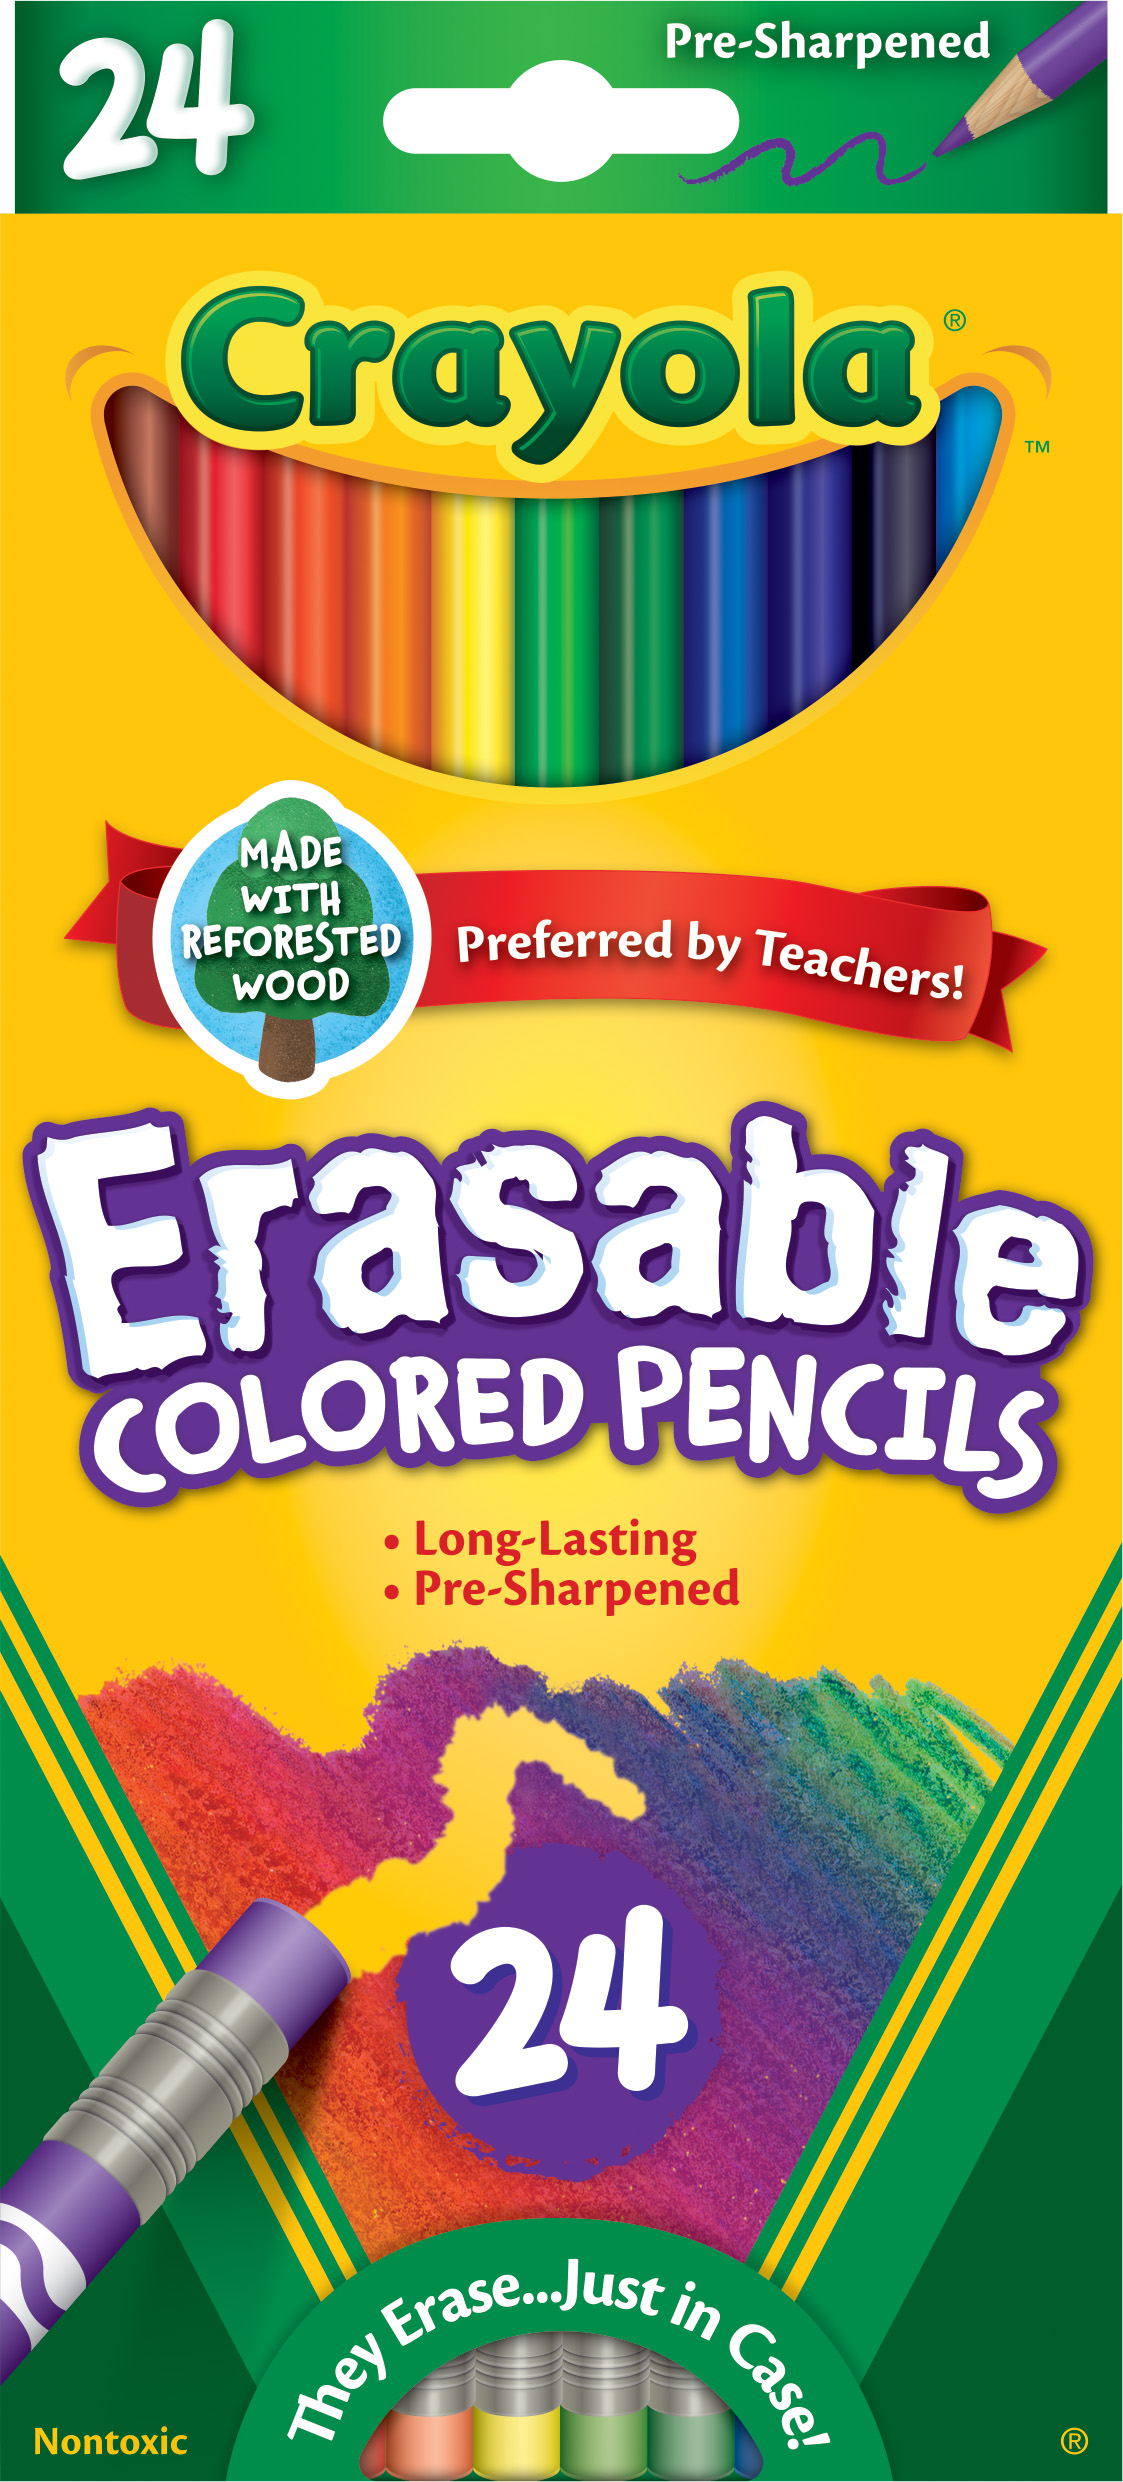 Crayola Erasable Colored Pencils, 24 Ct, School Supplies for Teens, Art Tools, Adult Coloring - image 1 of 8